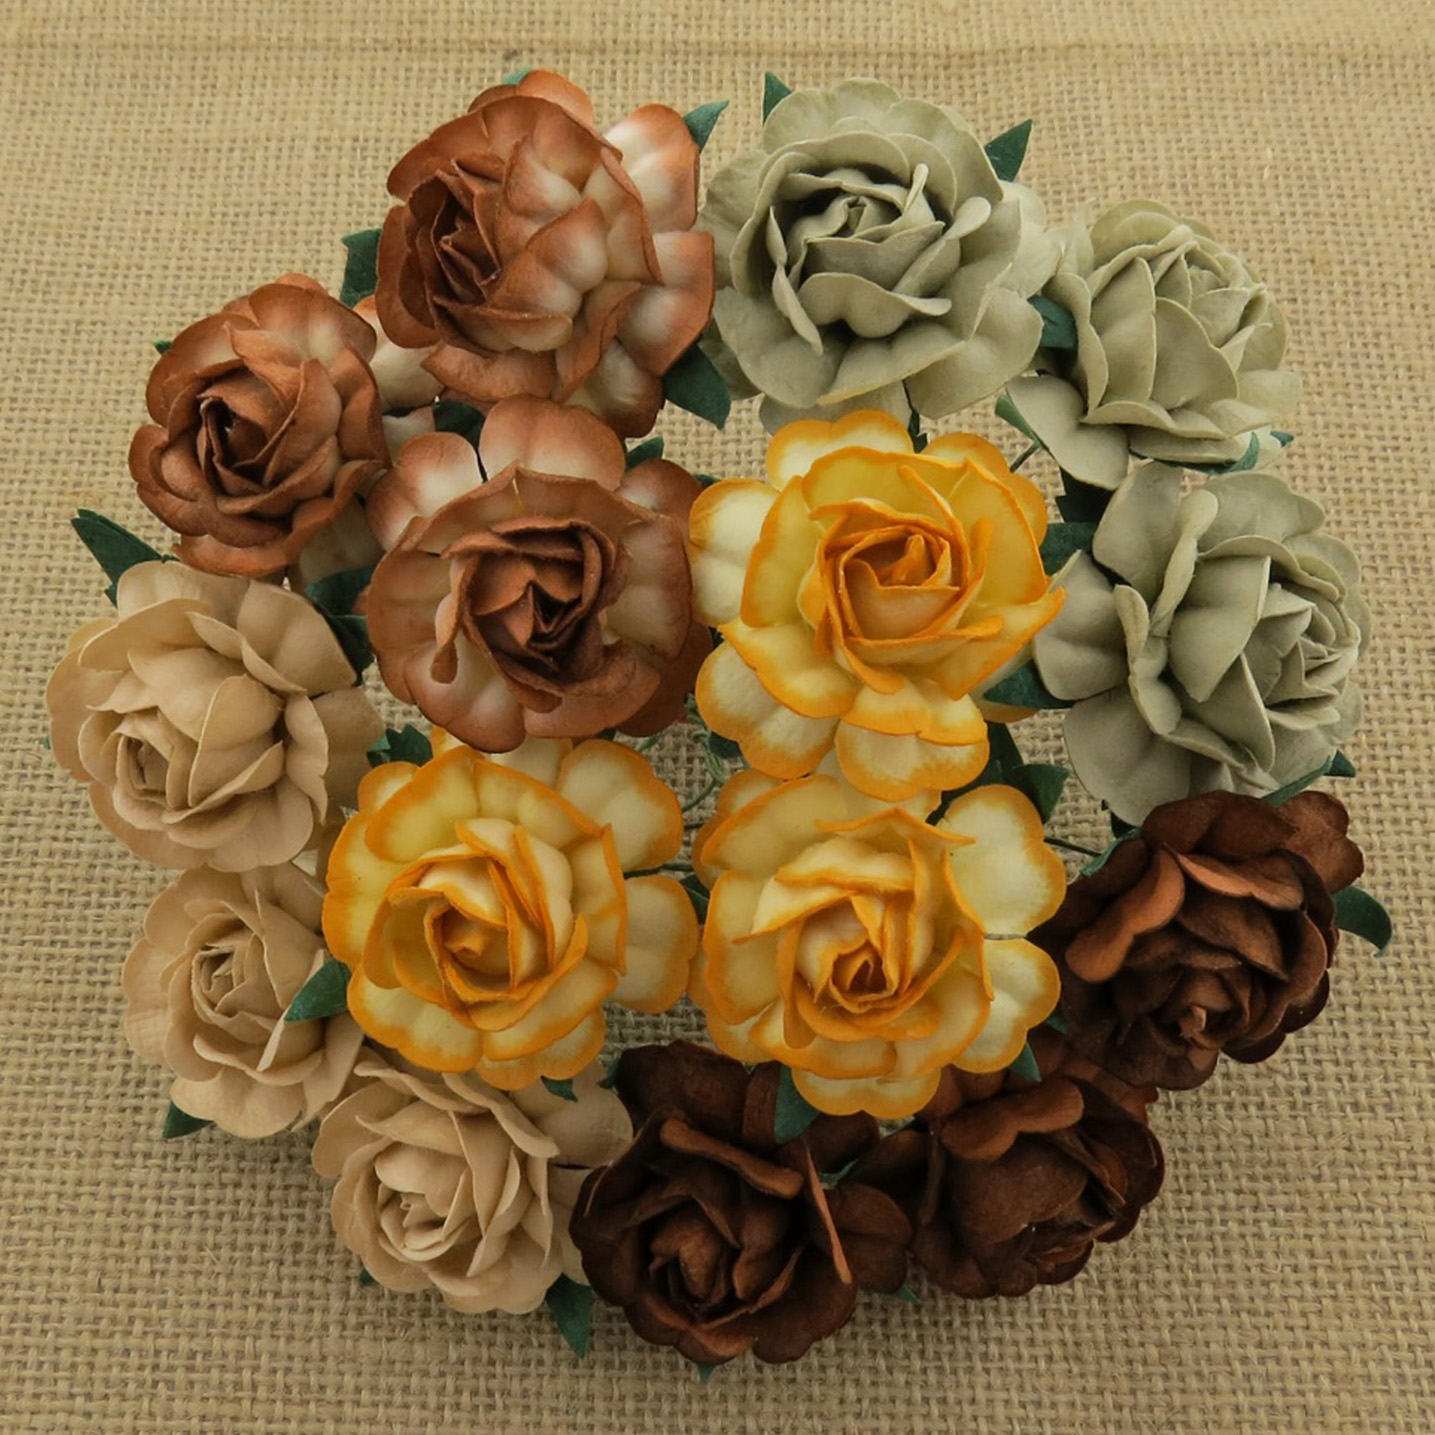 50 MIXED EARTH TONE MULBERRY PAPER TEA ROSES 40mm - 5 COLOR